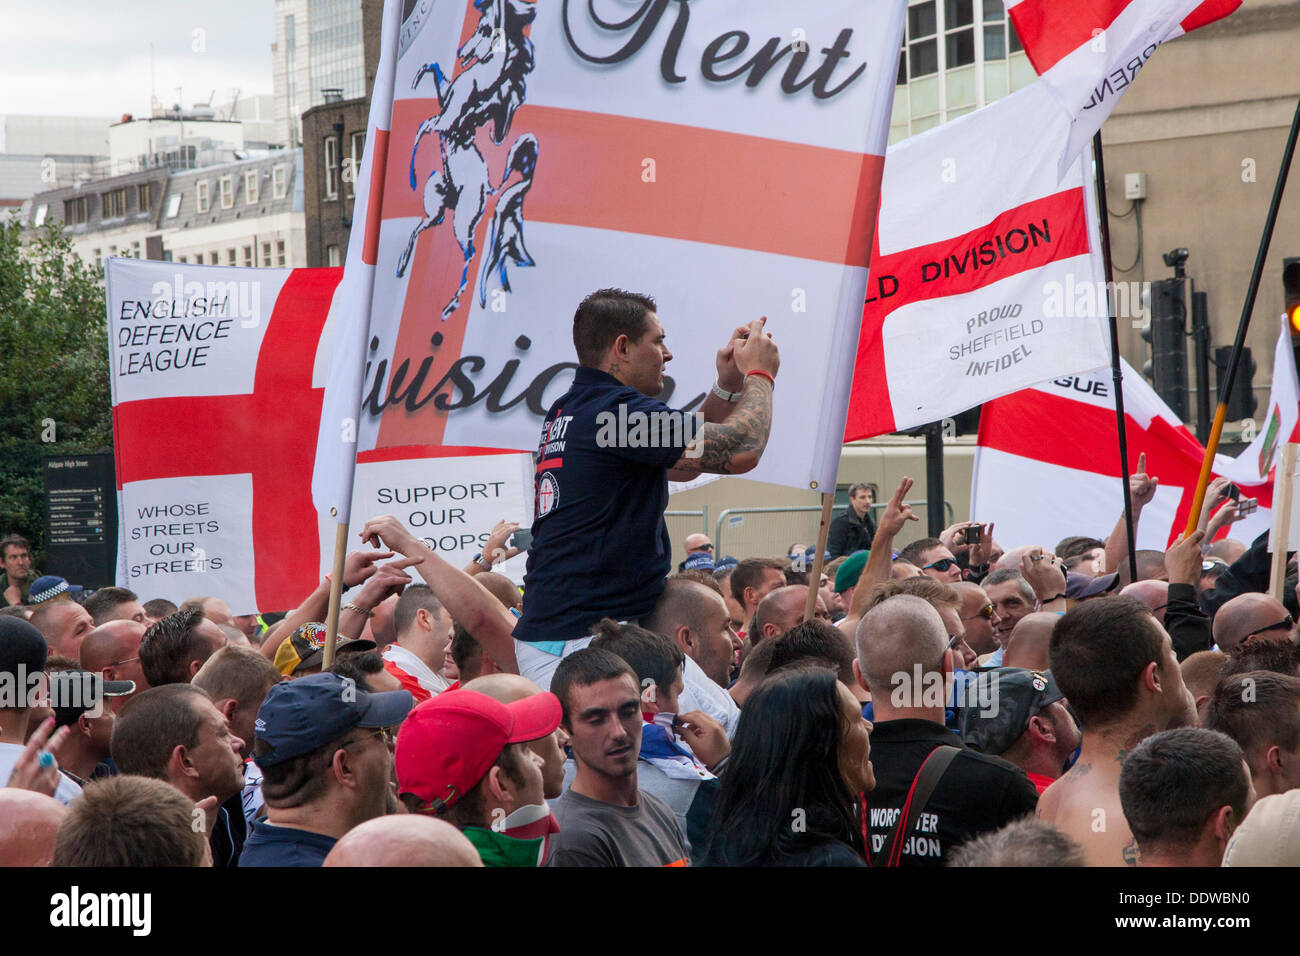 London, UK. 07th Sep, 2013. A man shoots speeches from atop his friend's shoulders as several hundred English Defence League supporters marched over Tower Bridge to a short rally outside Aldgate station on the edge of the borough of Tower Hamlets. Credit:  Paul Davey/Alamy Live News Stock Photo